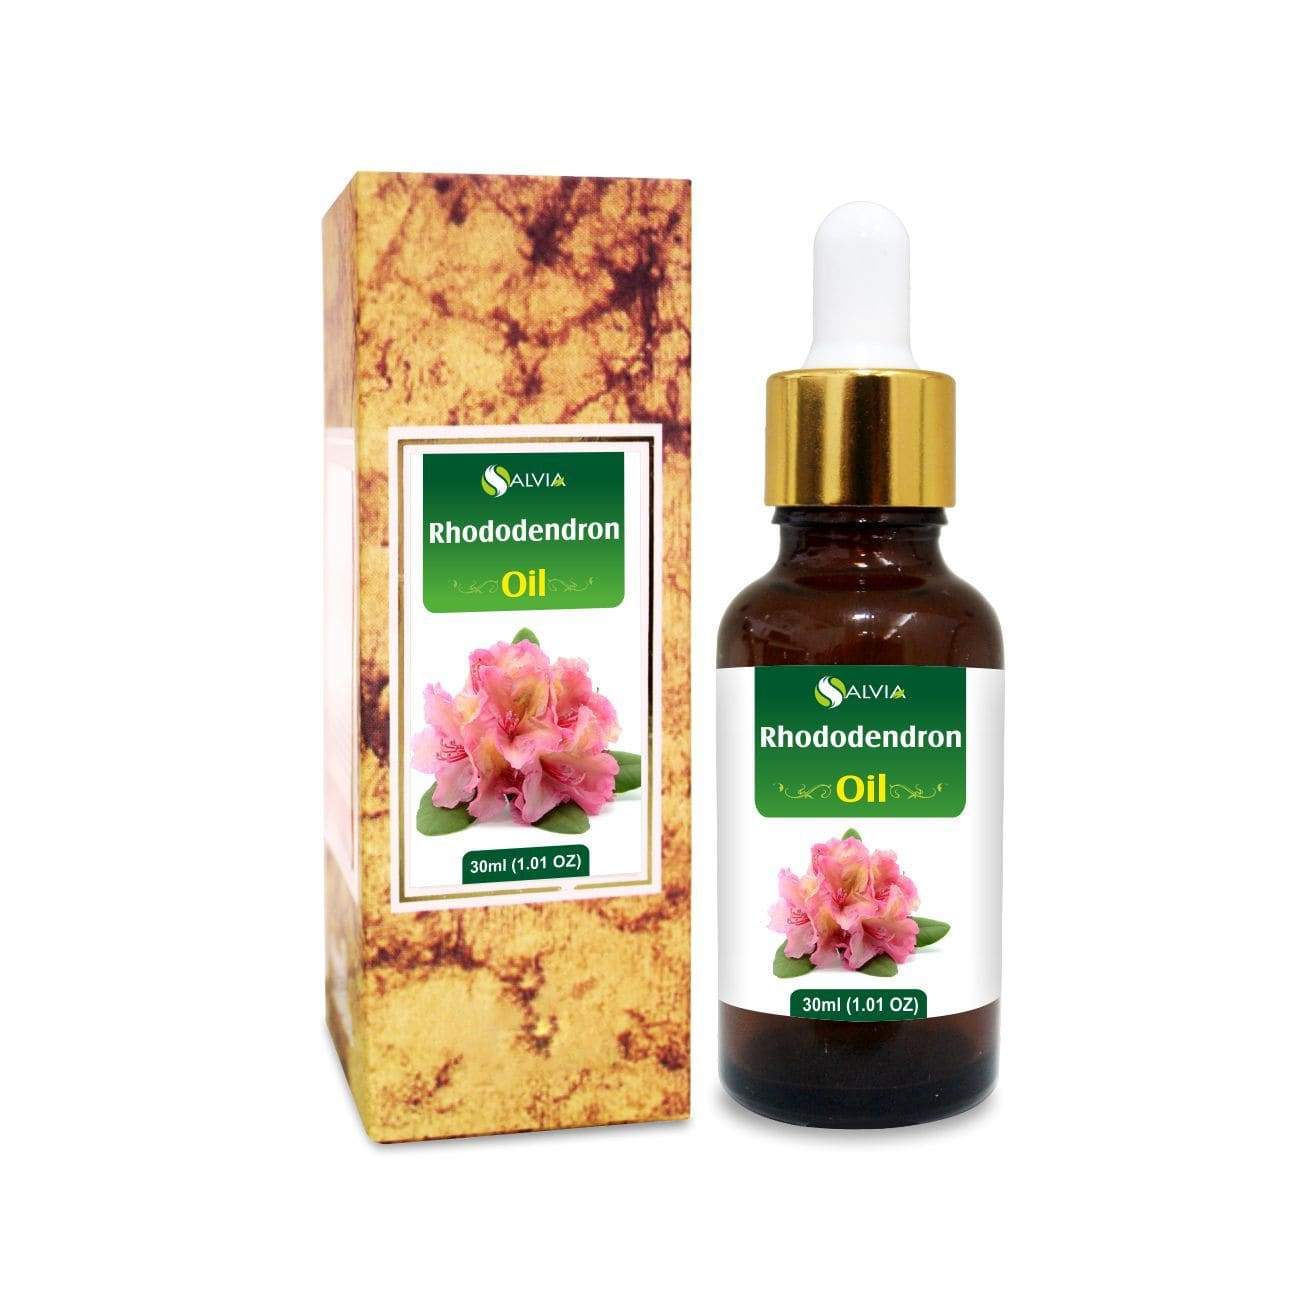 rhododendron benefits